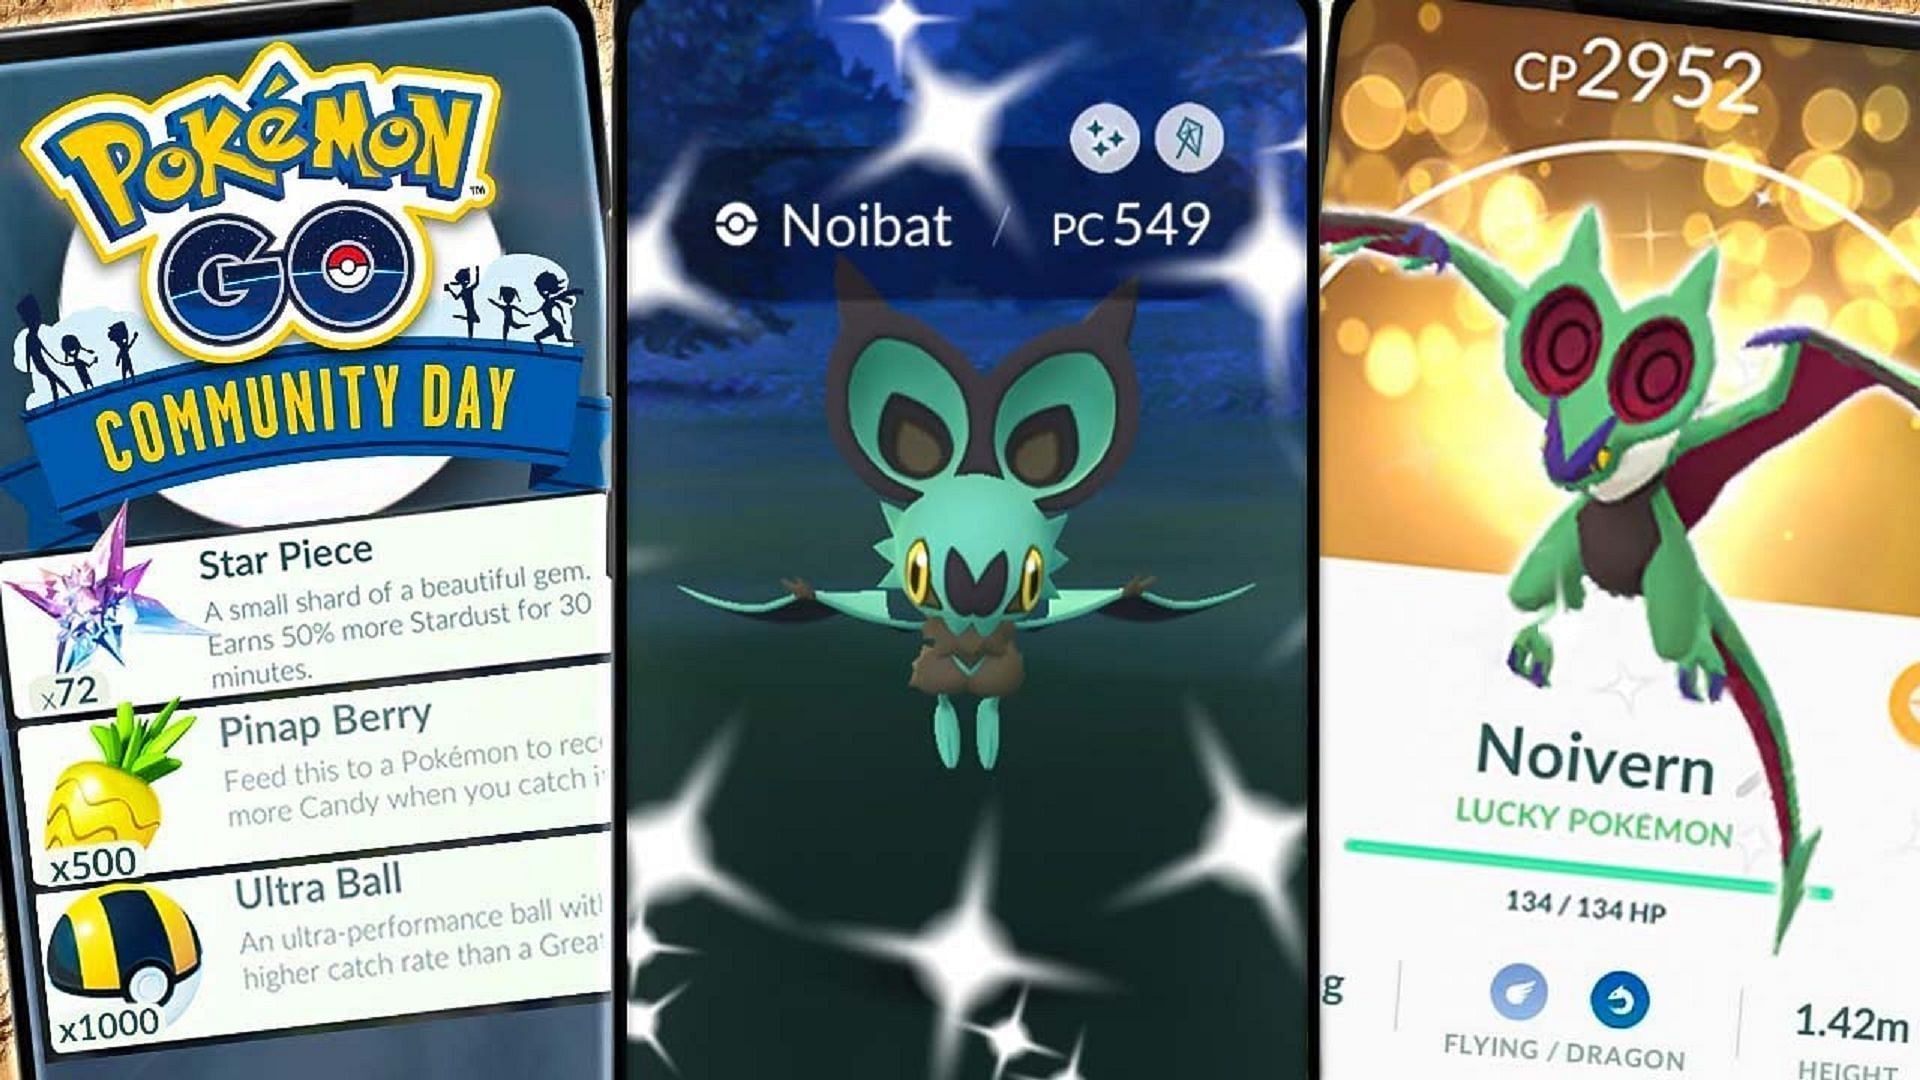 Noibat&#039;s upcoming Community Day isn&#039;t exactly ideal for Pokemon GO players who are time-constrained to play it (Image via The Trainer Club/YouTube)